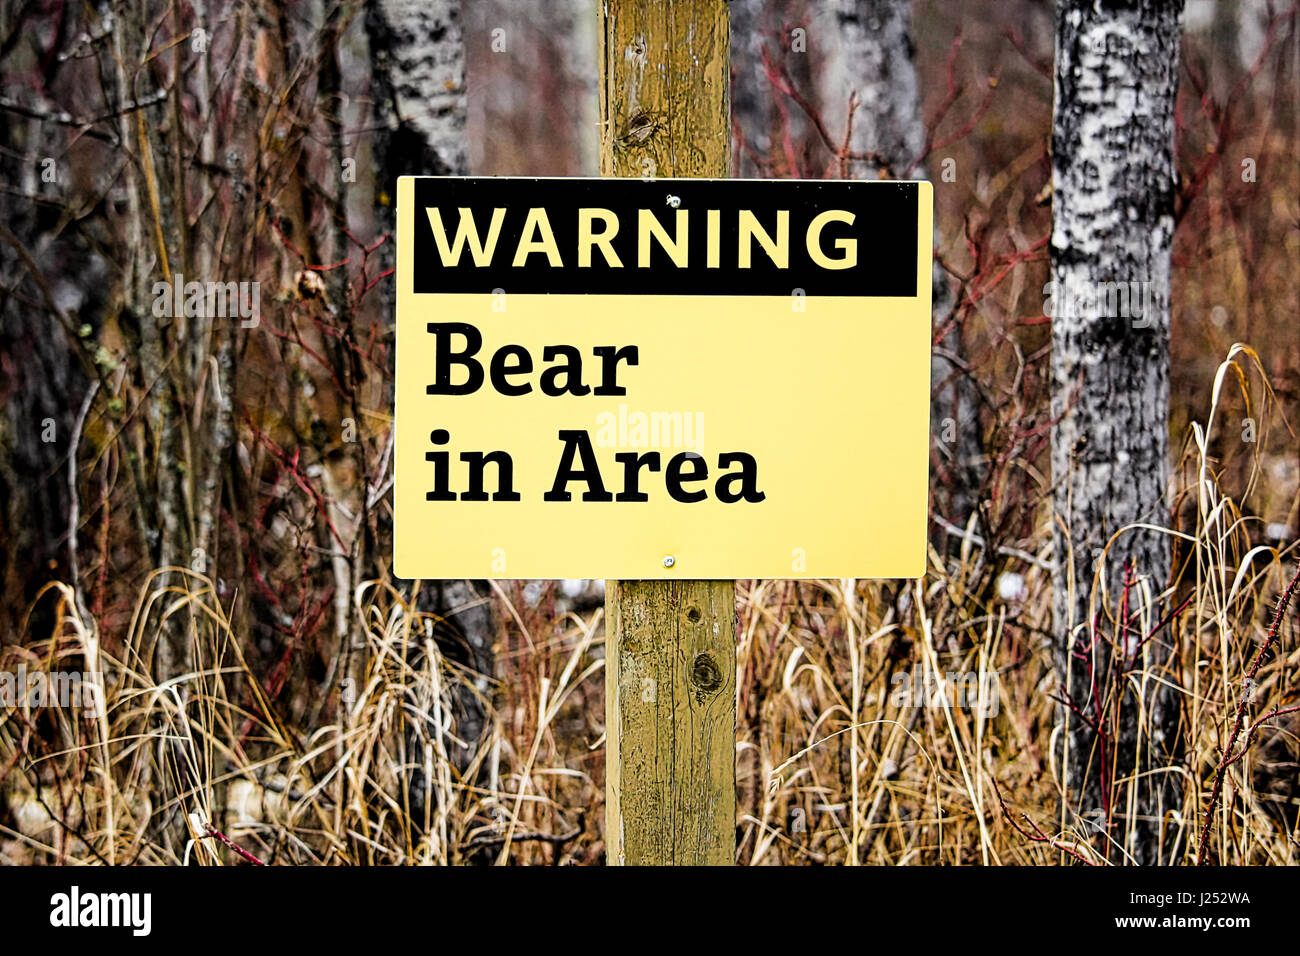 Warning Bear in Area sign. Stock Photo